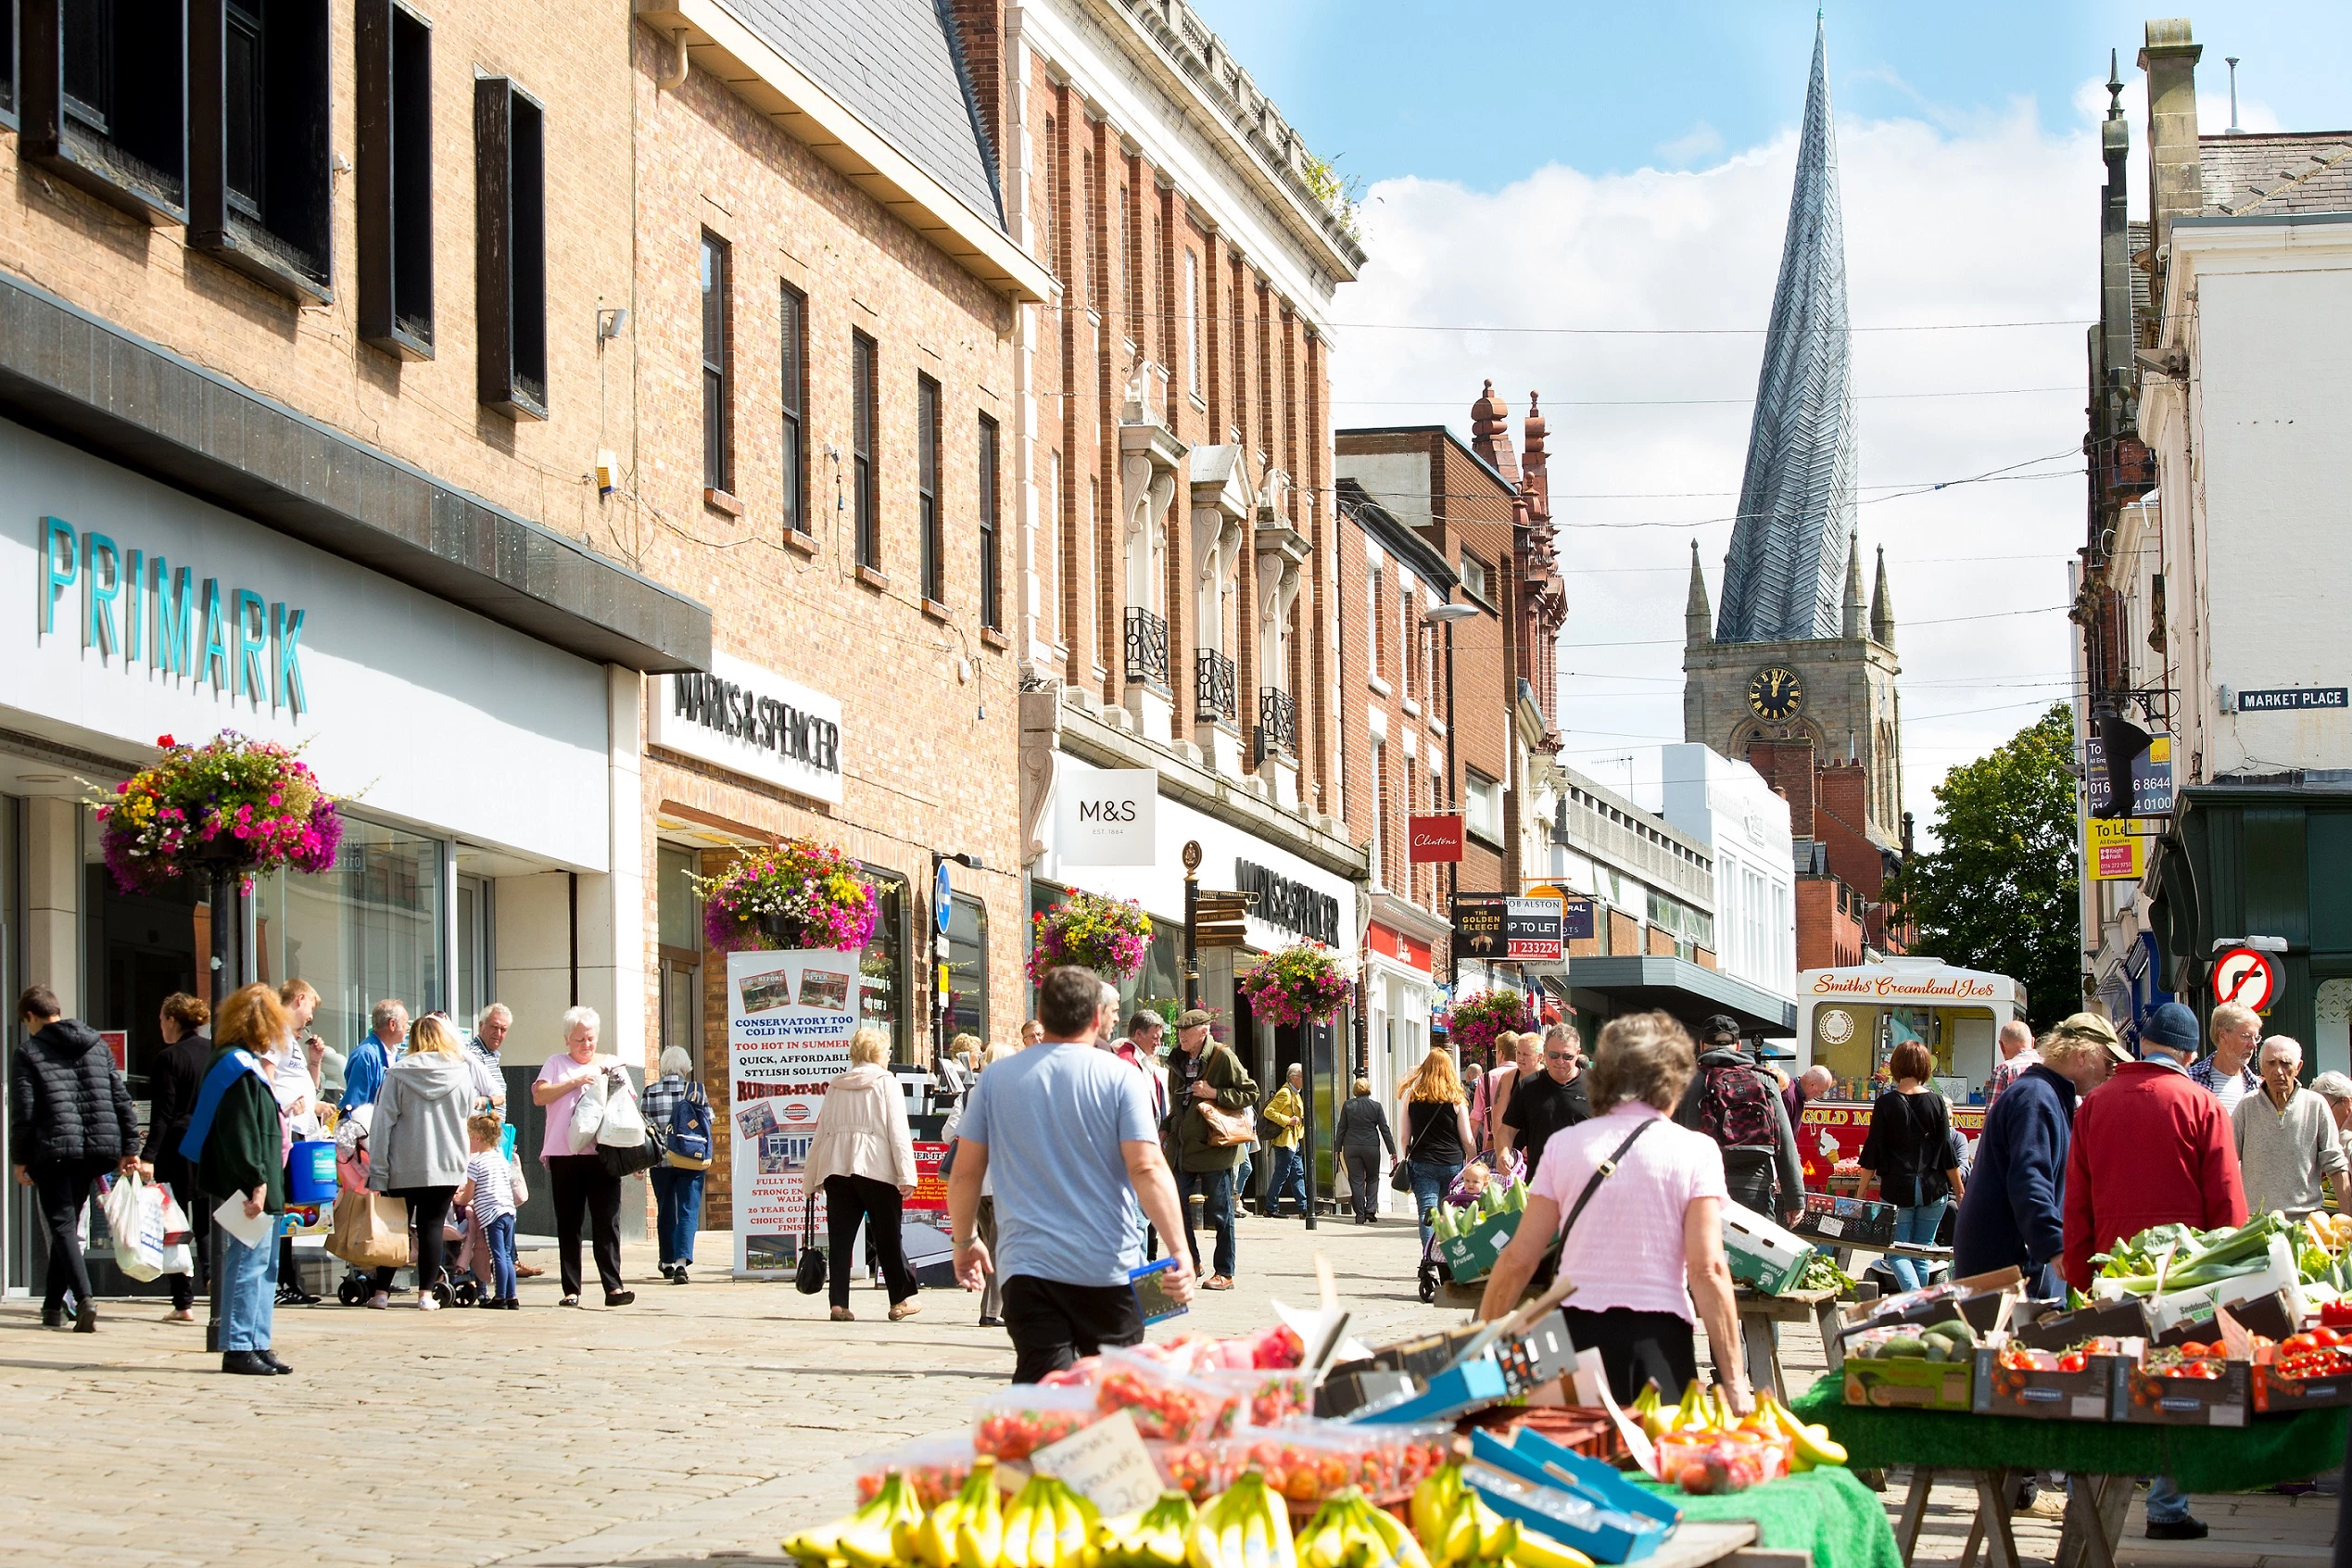 Chesterfield's town centre market